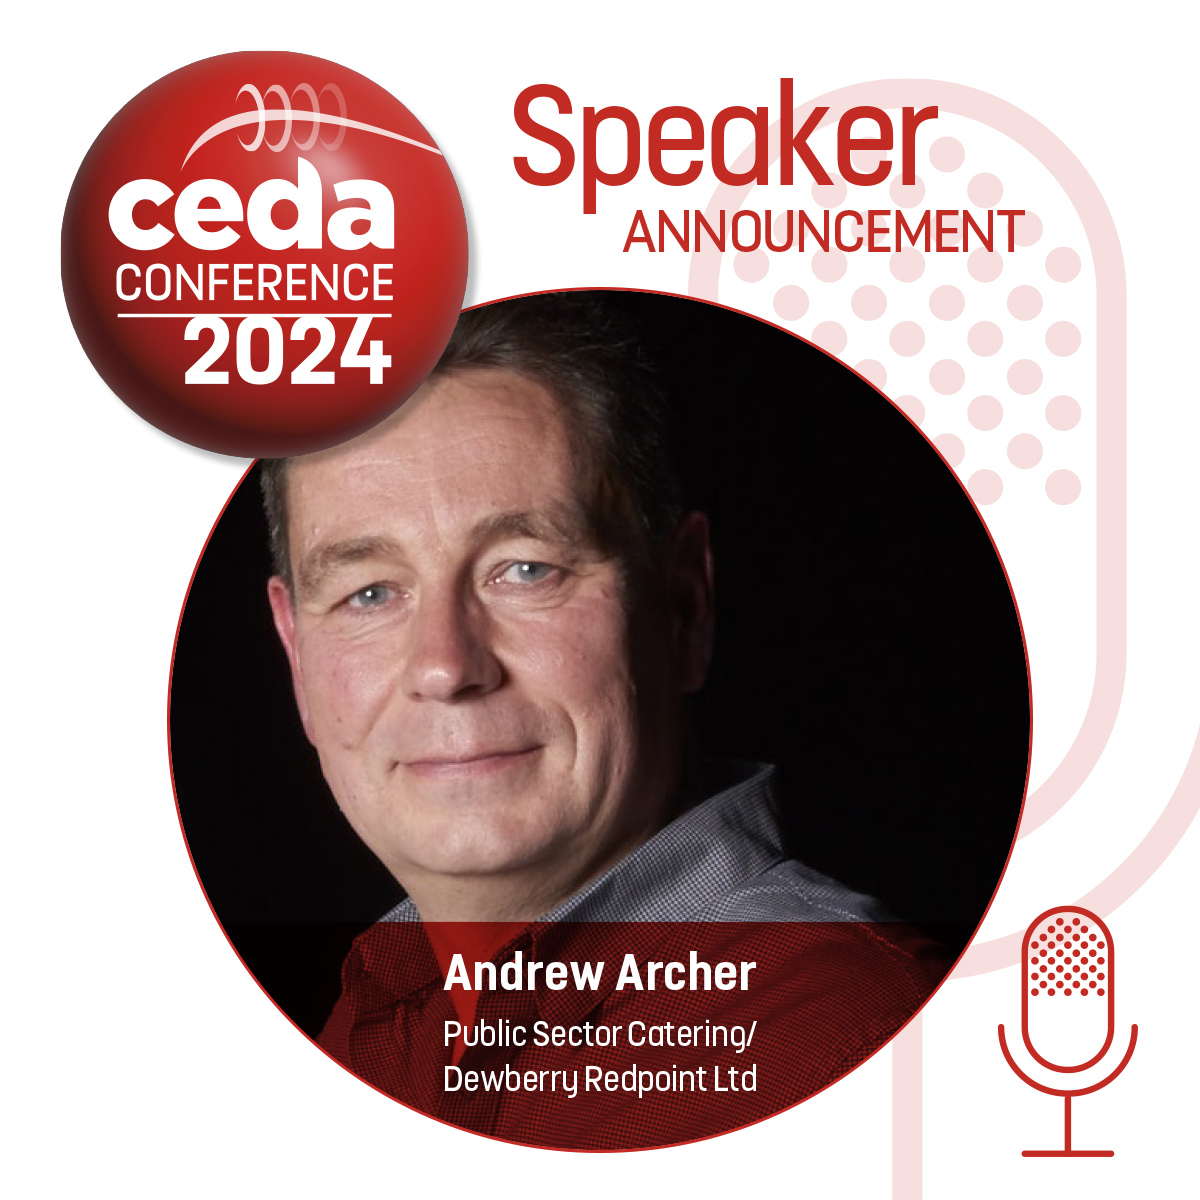 It's time for our first speaker! Andrew Archer - Talking Public Sector Catering ✅ Andrew has worked for Restaurant Magazine team as Sales Director. He then went onto Dewberry Redpoint, and in 2018 acquired the business. Read more here: loom.ly/43lXOeg